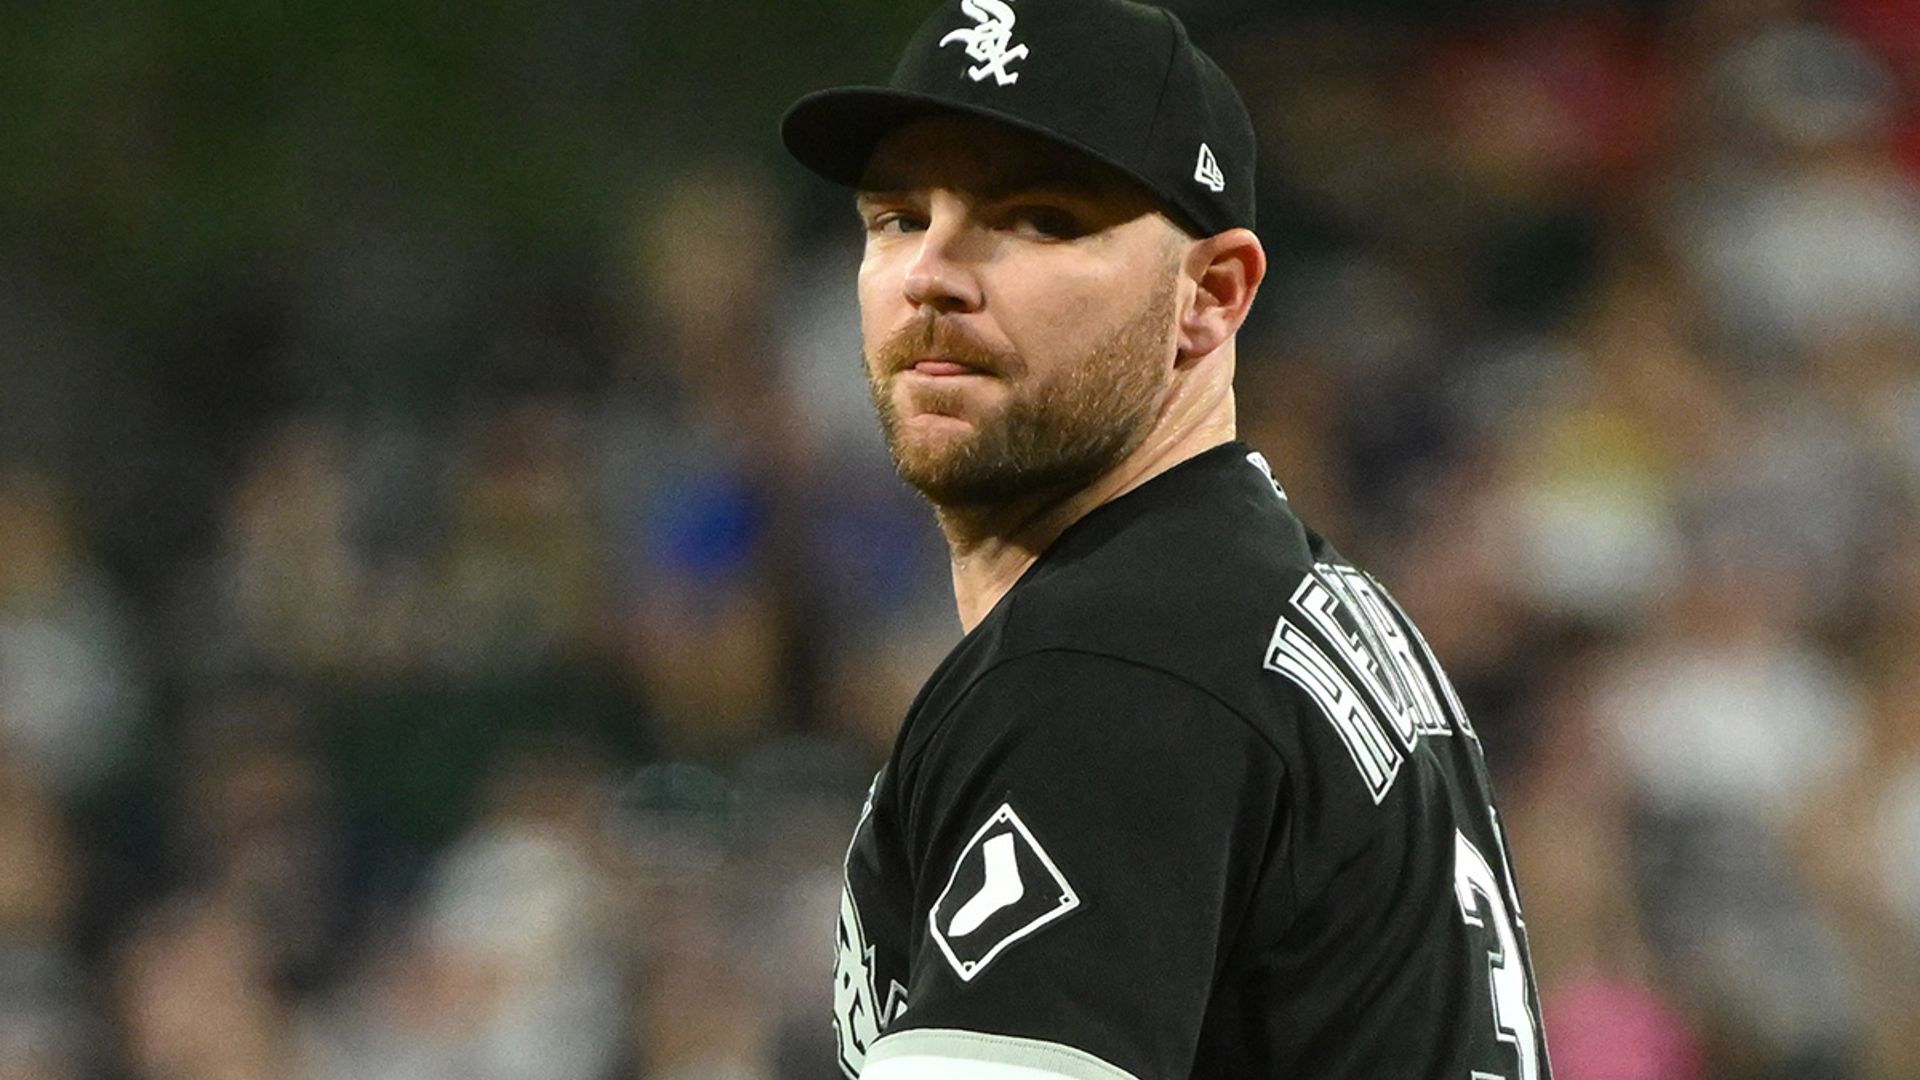 Chicago White Sox pitcher Liam Hendriks begins treatment after shock cancer  diagnosis